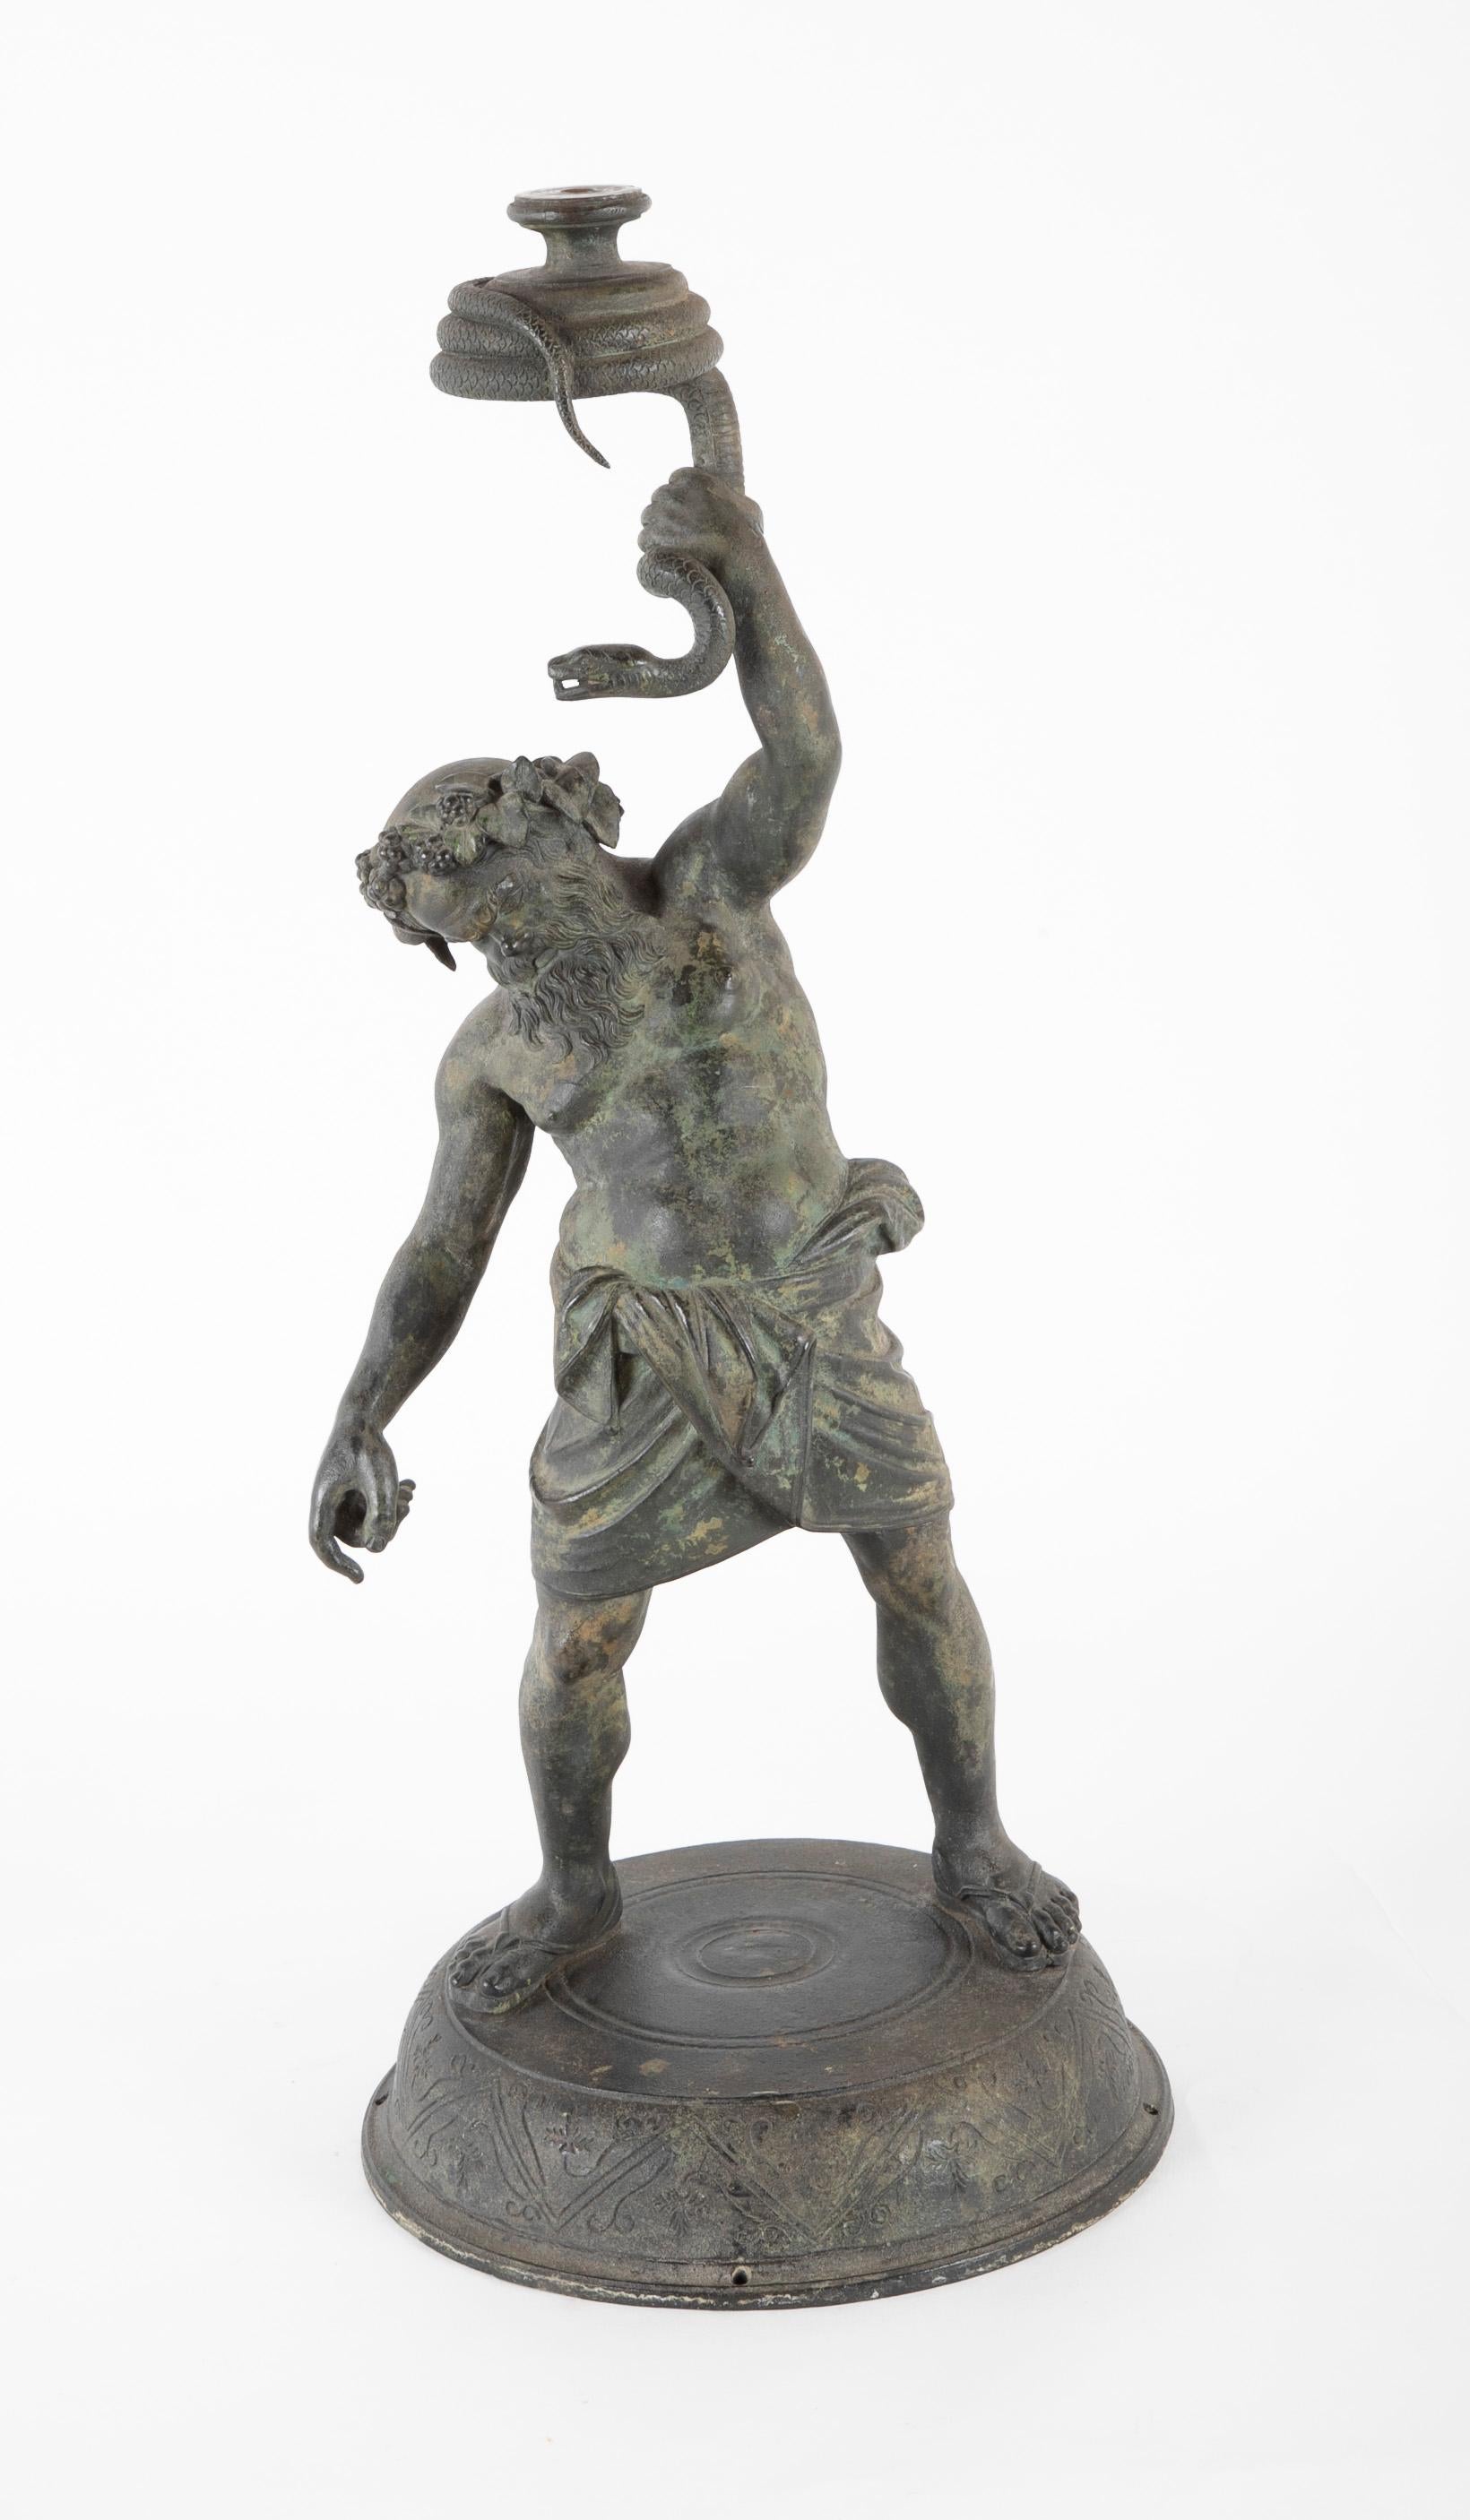 Superior quality large scale Italian Grand Tour bronze of the god Silenus after the Roman original excavated at Pompeii in 1864. This very fine cast shows the god holding aloft a coiled snake. It is believed the original sculpture held a glass orb